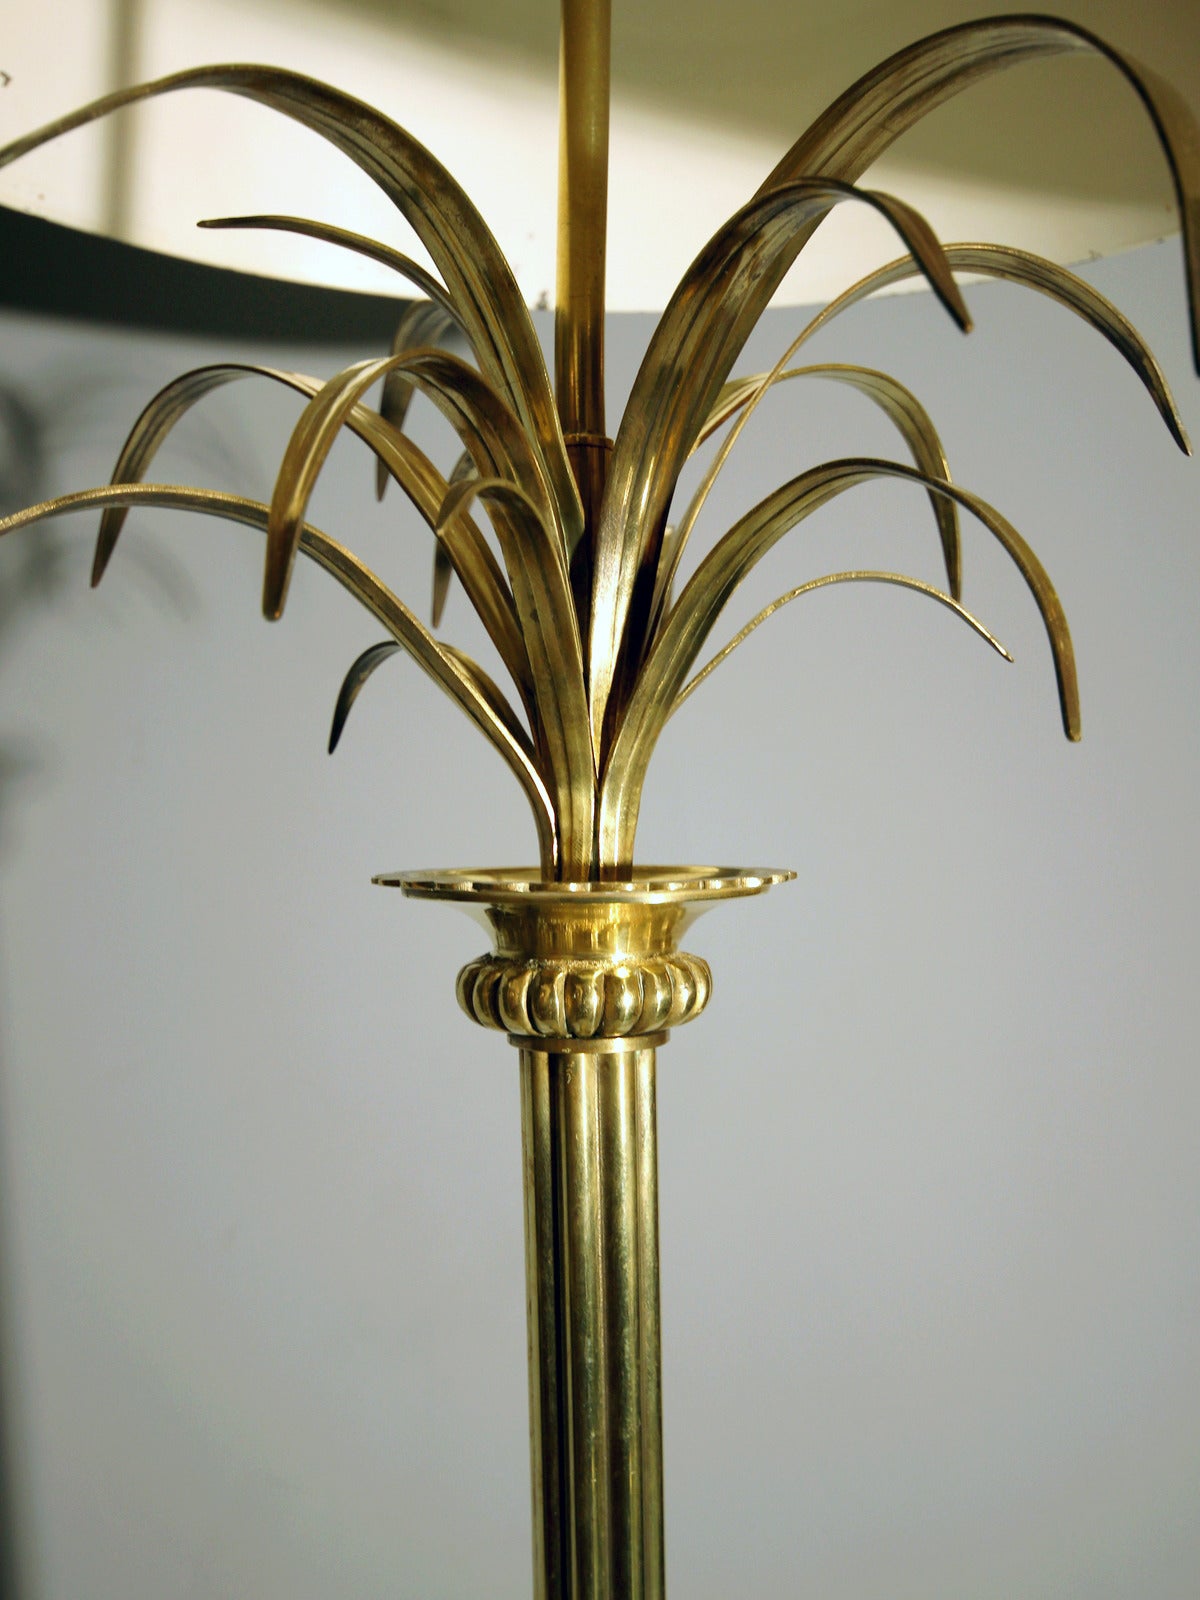 1970s floor lamp in polished and black lacquered brass, with original lampshade in lacquered metal. Very good quality. Unsigned.